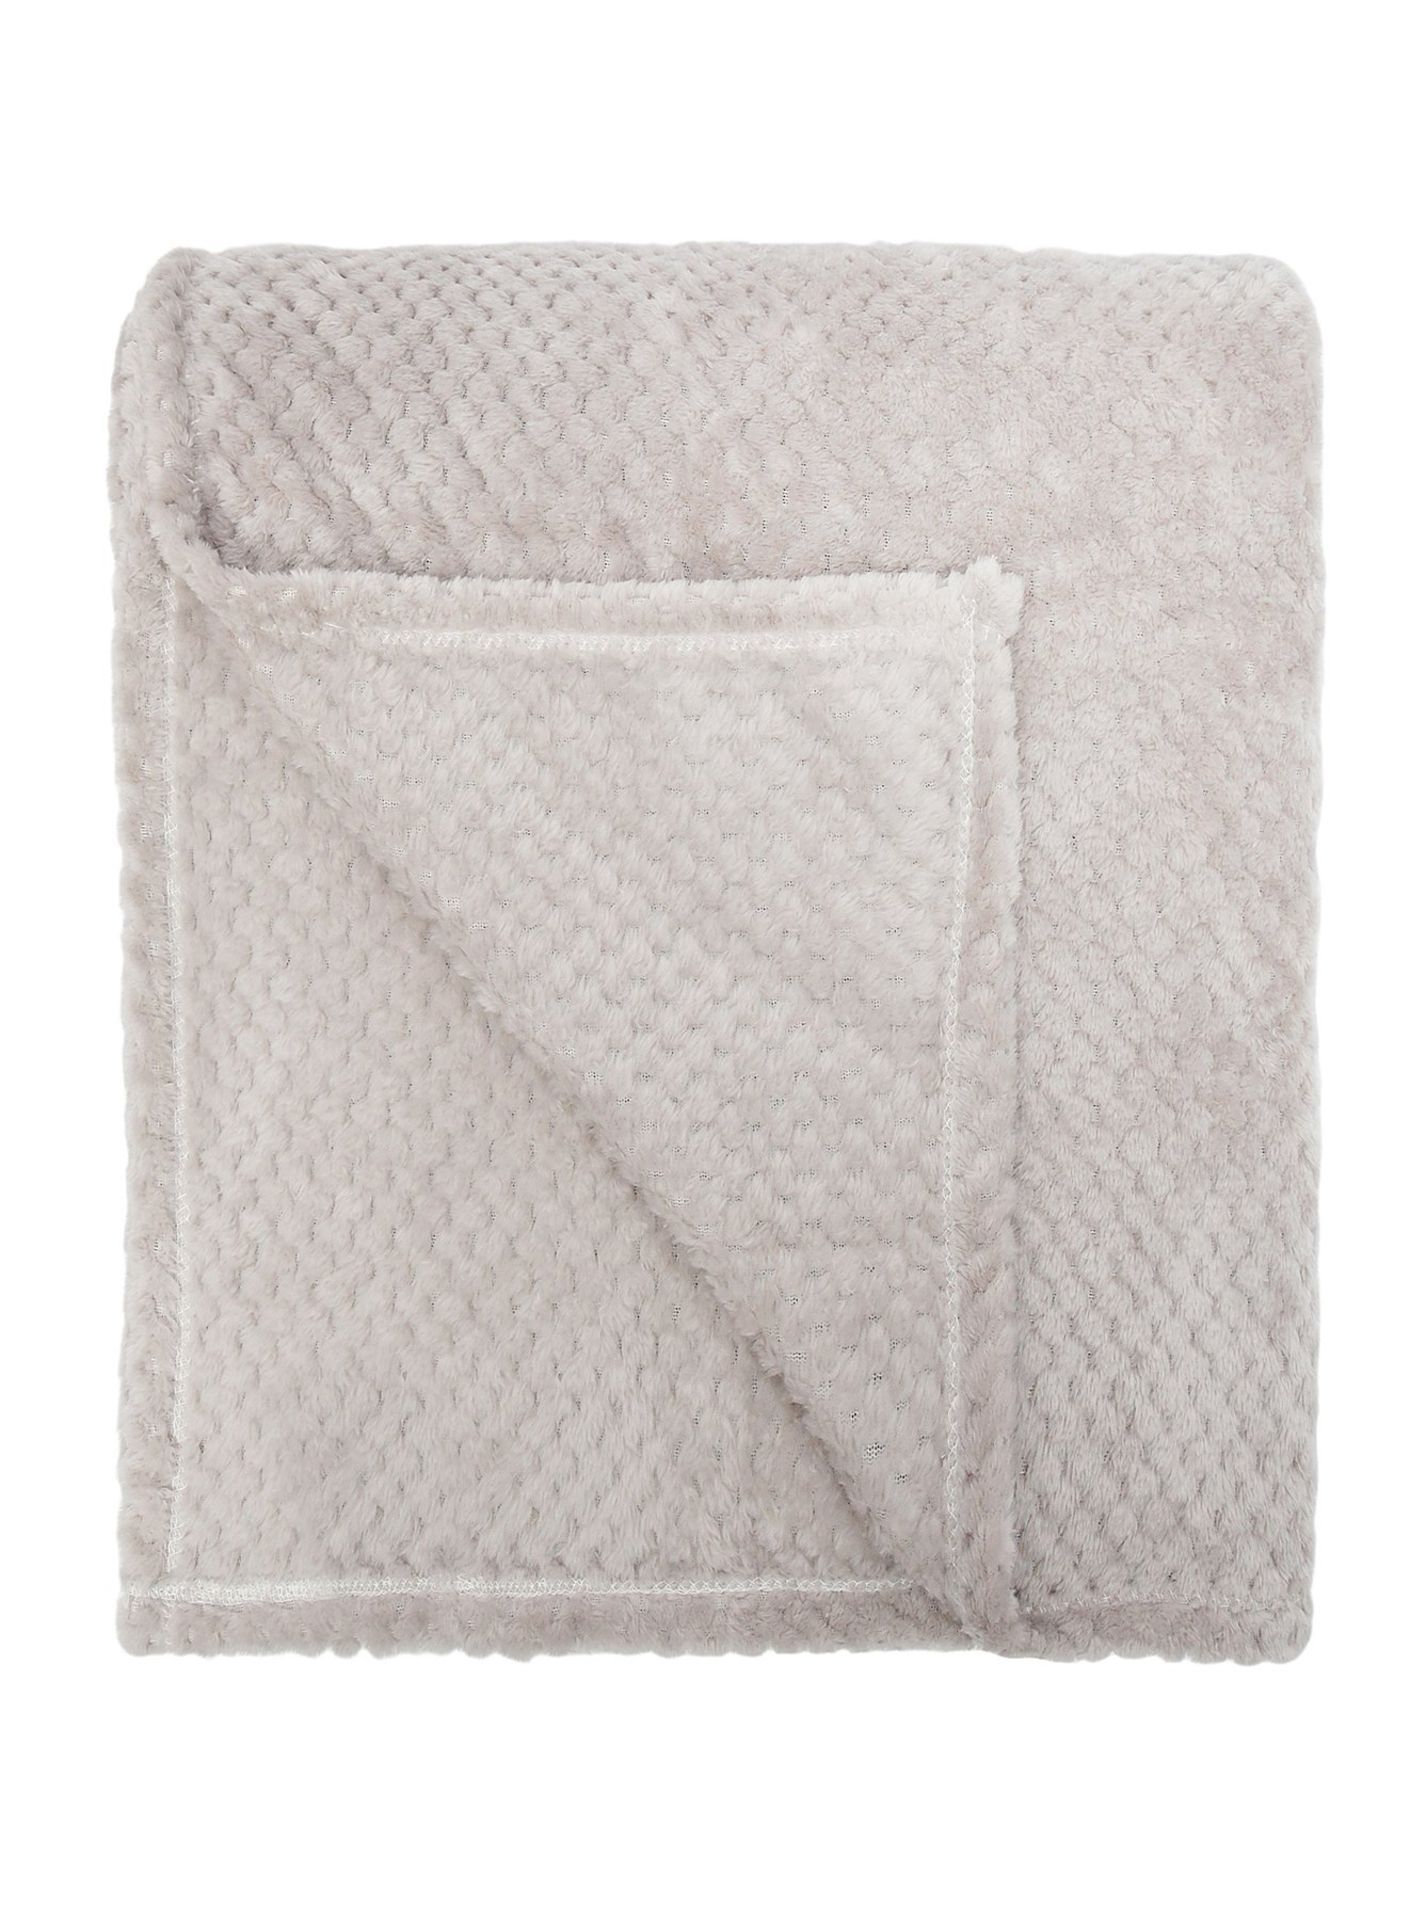 16x NEW & PACKAGED SLEEPDOWN Cosy Collection Soft Touch Waffle Fleece Throw 130 x 160cm - NATURAL. - Image 6 of 6